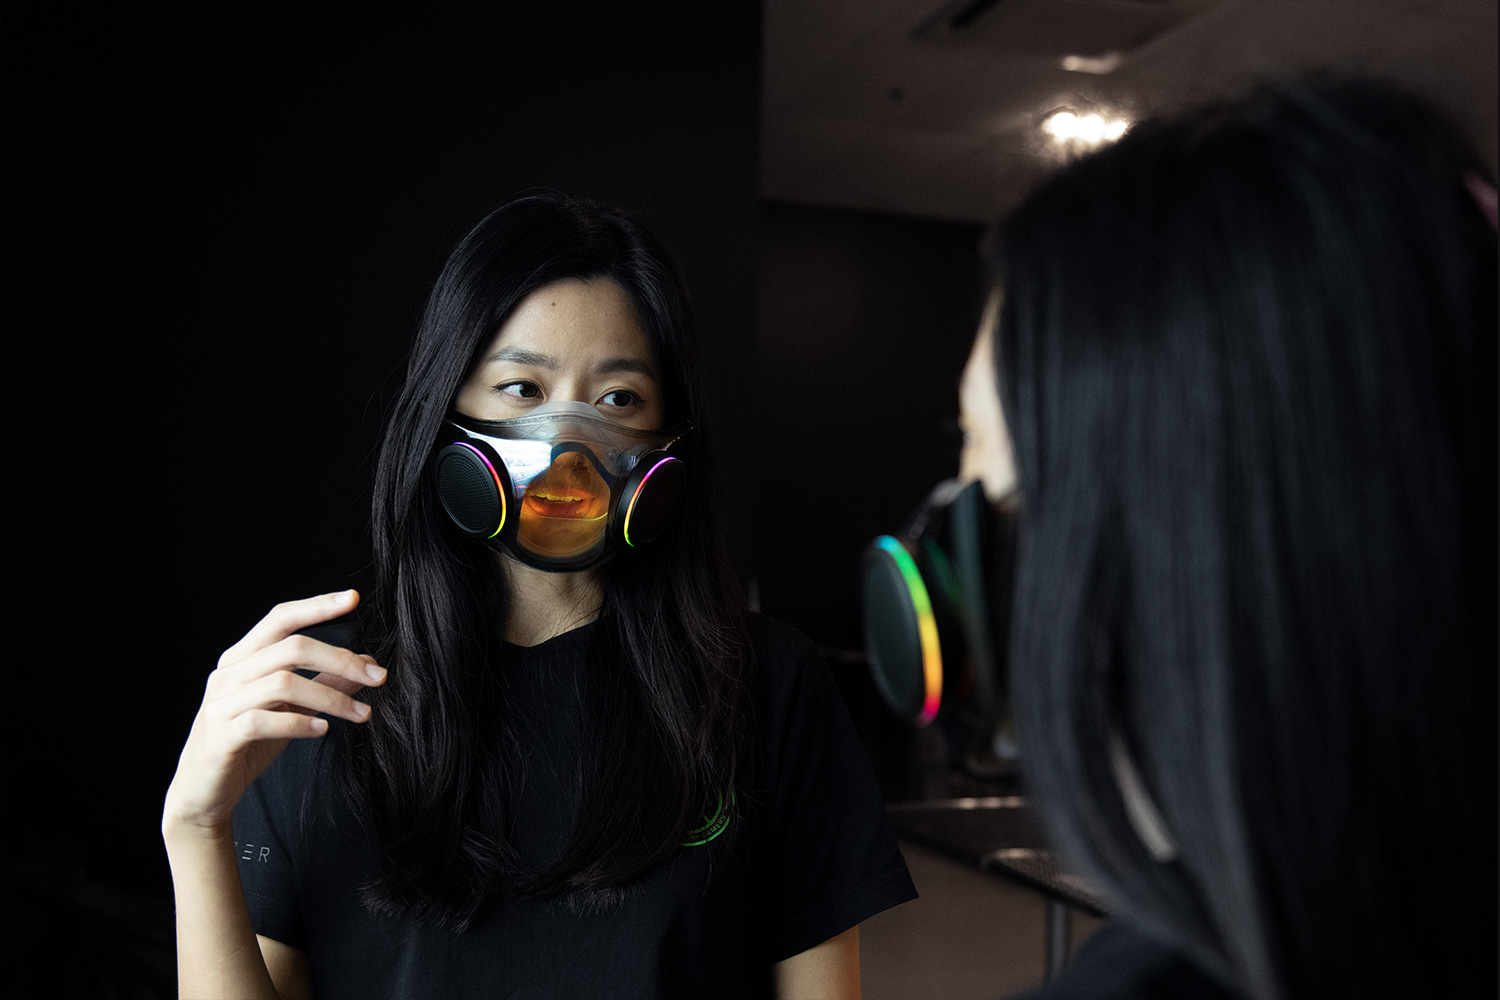 In a few months, you may be able to buy Razer’s Project Hazel — the high-tech face mask with working RGB lights the company unveiled at CES in